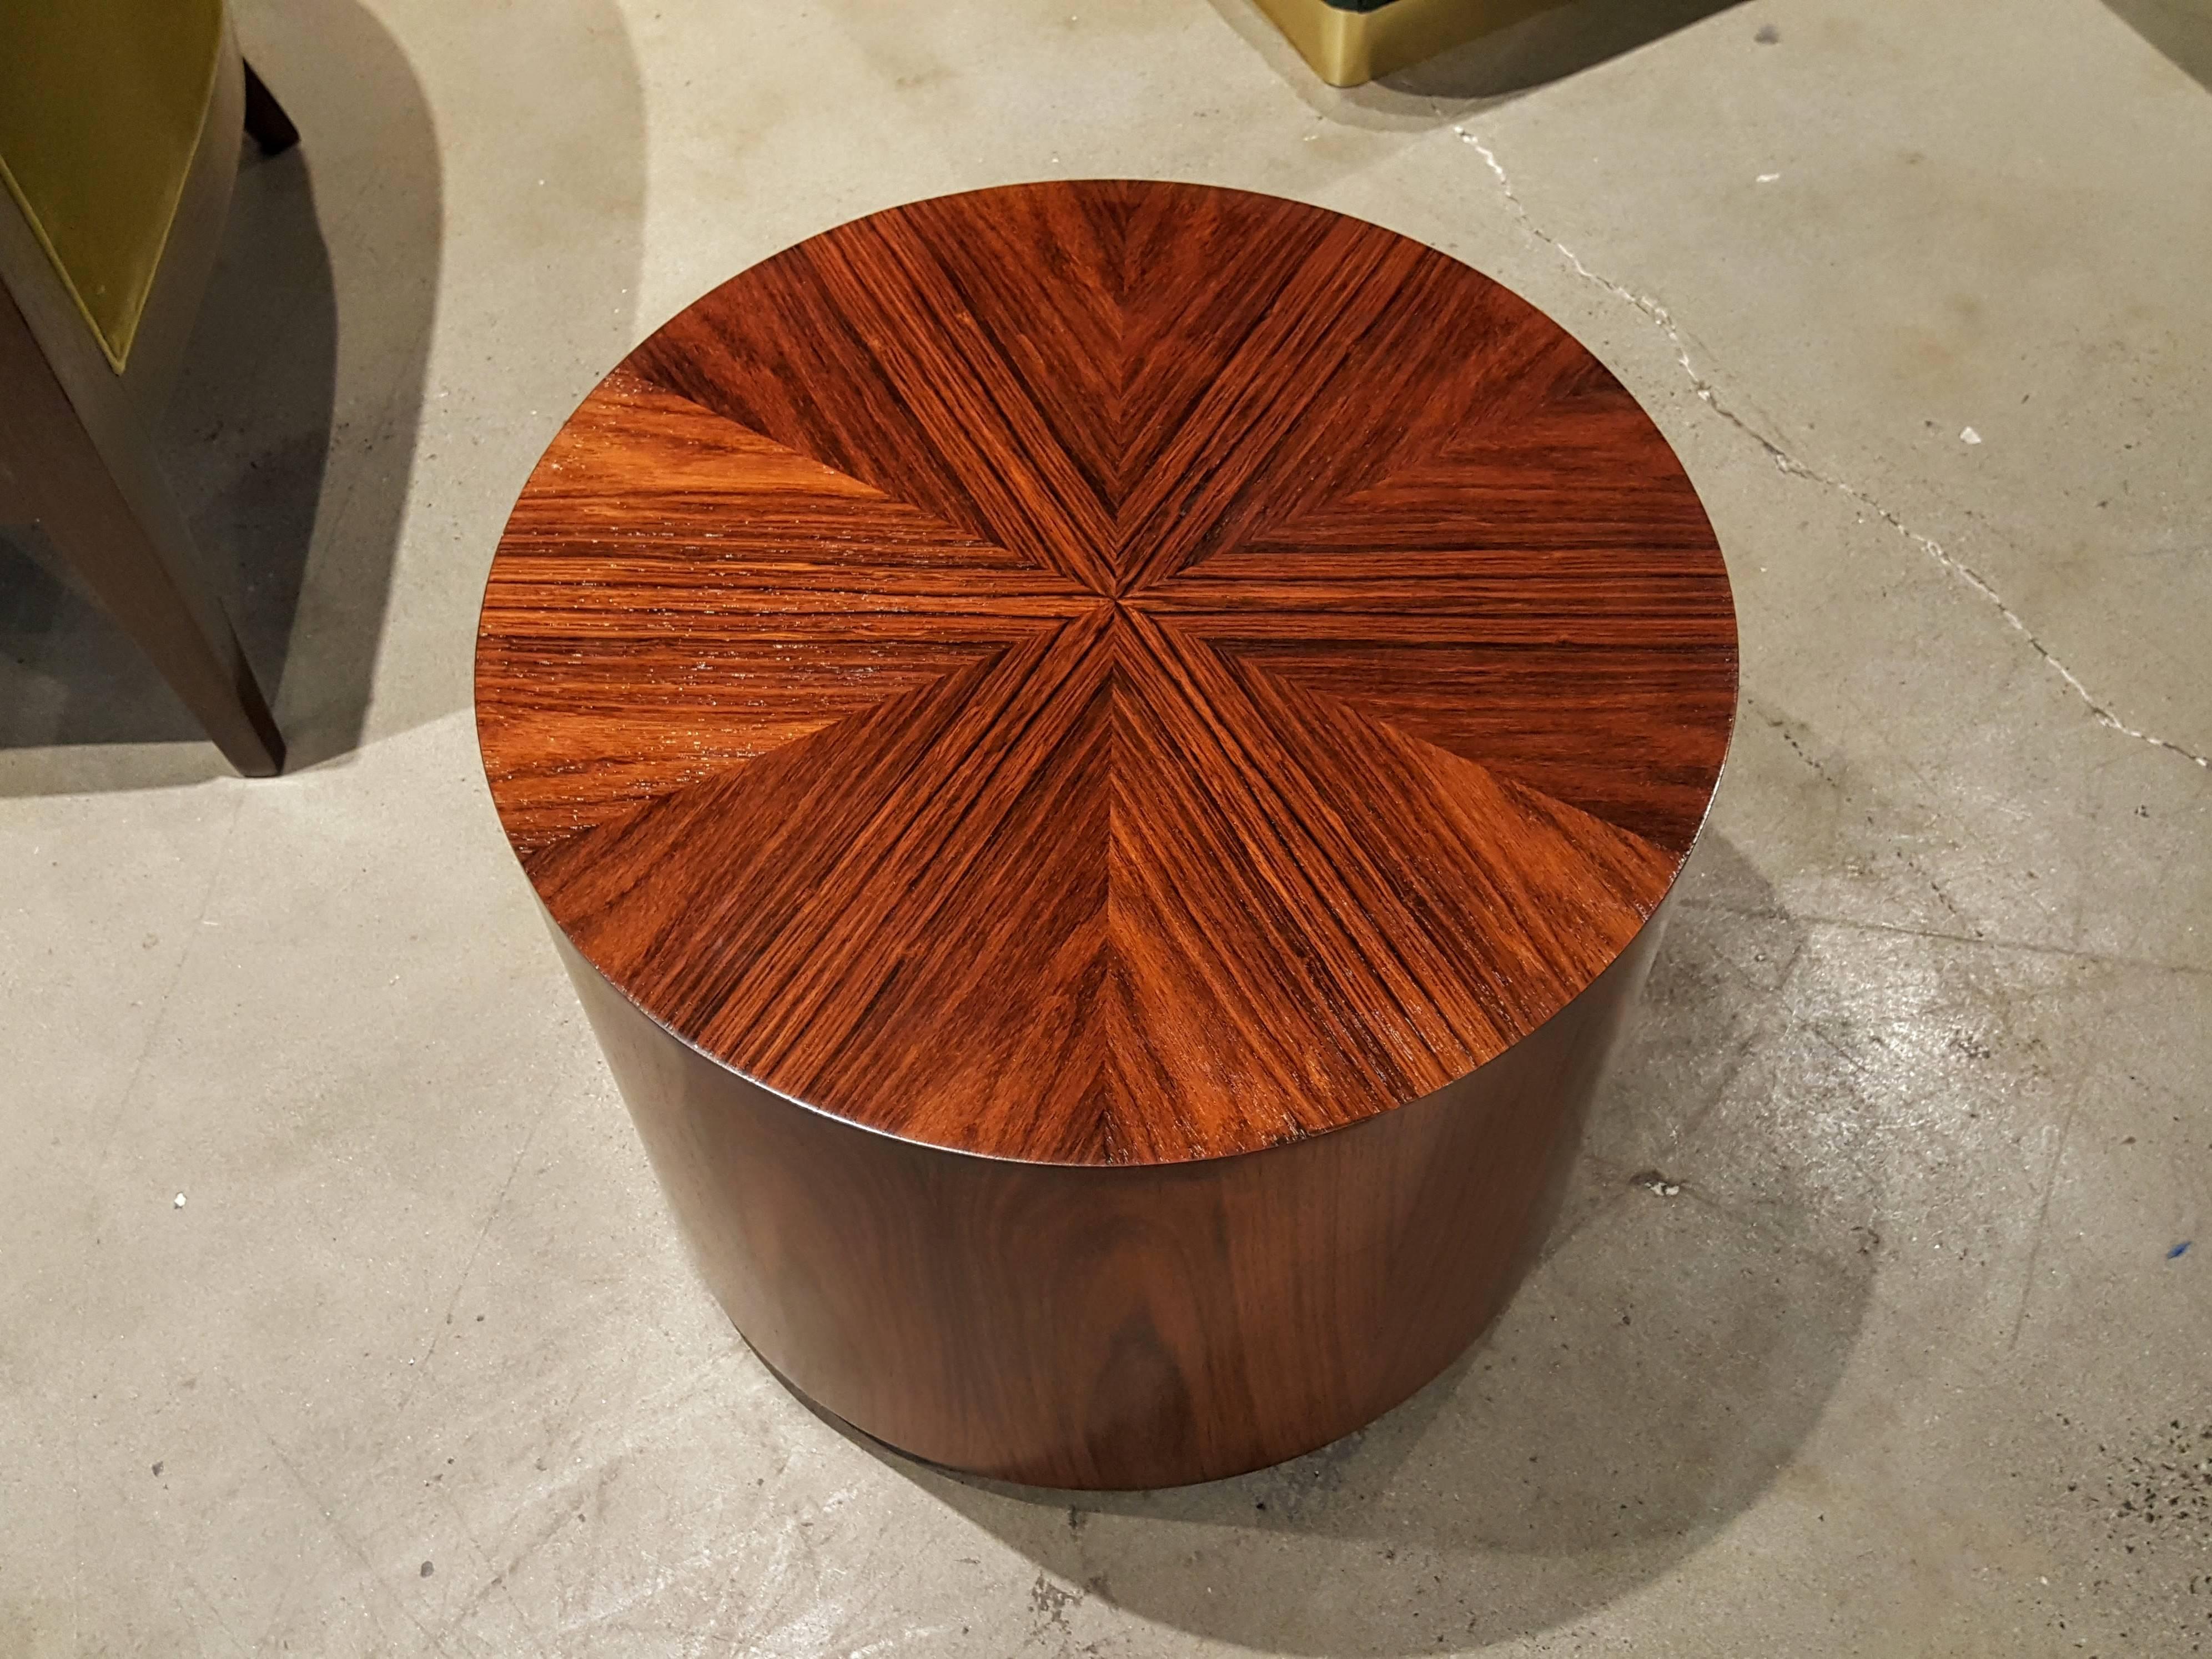 This piece glows! Rare rosewood drum end table by Harvey Probber, 1960s. Gorgeous, dramatic exotic wood grain with lovely book-matched pattern on top stunning piece of occasional furniture. Works well with modern and traditional interiors. Perfectly